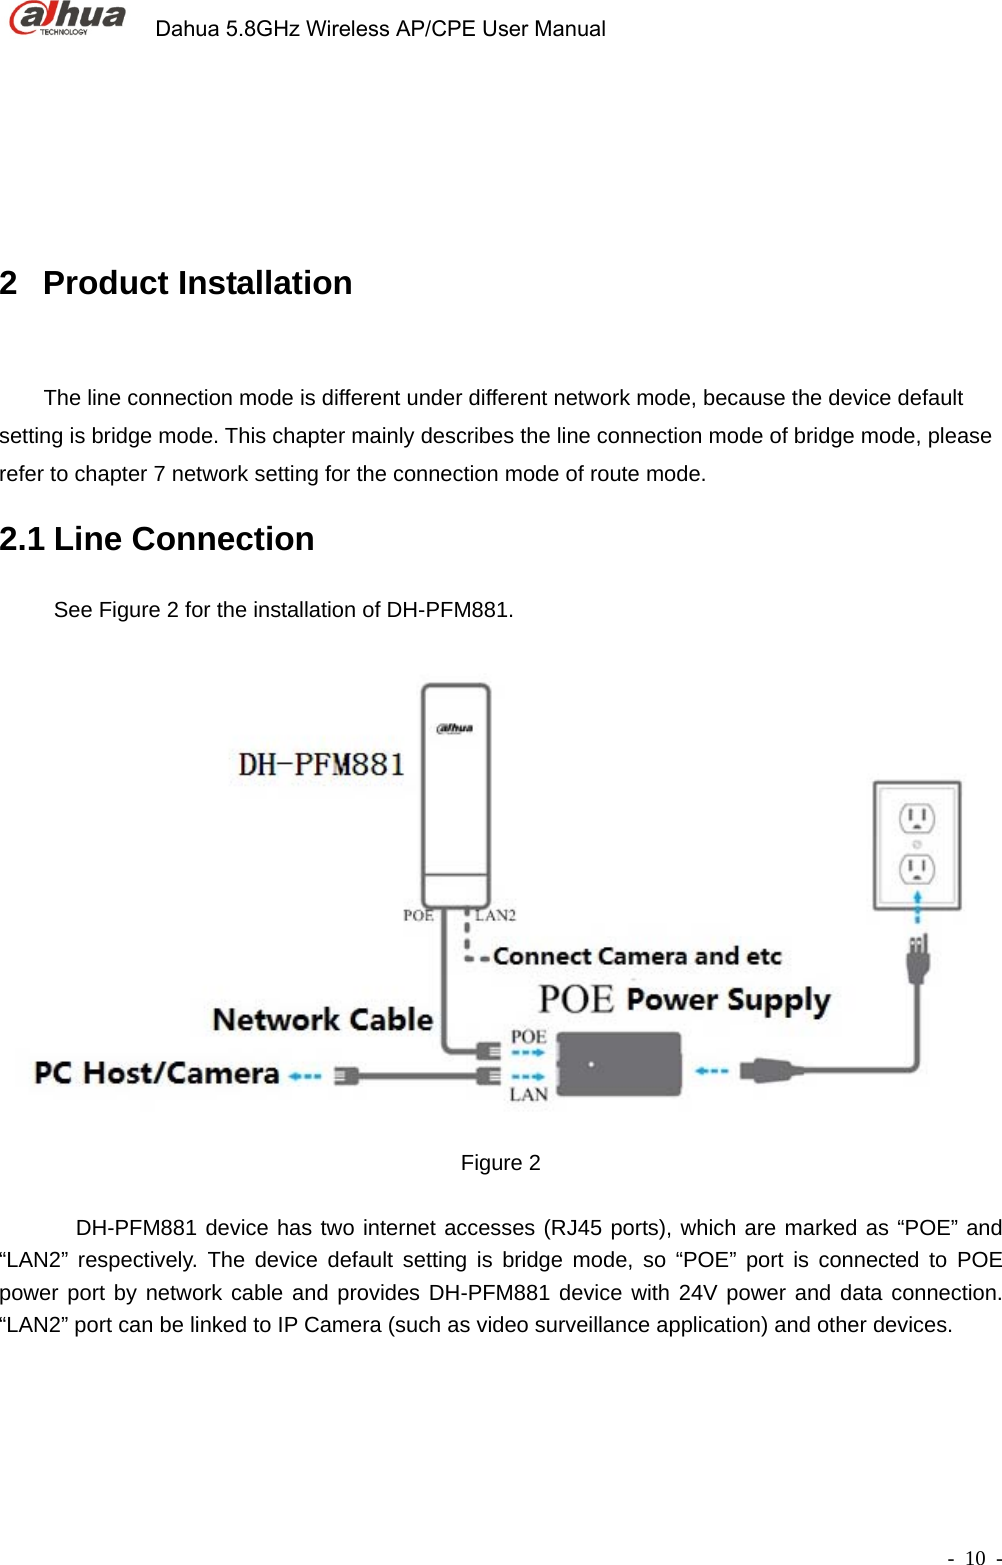             Dahua 5.8GHz Wireless AP/CPE User Manual        - 10 - 2 Product Installation      The line connection mode is different under different network mode, because the device default setting is bridge mode. This chapter mainly describes the line connection mode of bridge mode, please refer to chapter 7 network setting for the connection mode of route mode. 2.1 Line Connection   See Figure 2 for the installation of DH-PFM881.  Figure 2           DH-PFM881 device has two internet accesses (RJ45 ports), which are marked as “POE” and “LAN2” respectively. The device default setting is bridge mode, so “POE” port is connected to POE power port by network cable and provides DH-PFM881 device with 24V power and data connection. “LAN2” port can be linked to IP Camera (such as video surveillance application) and other devices.   